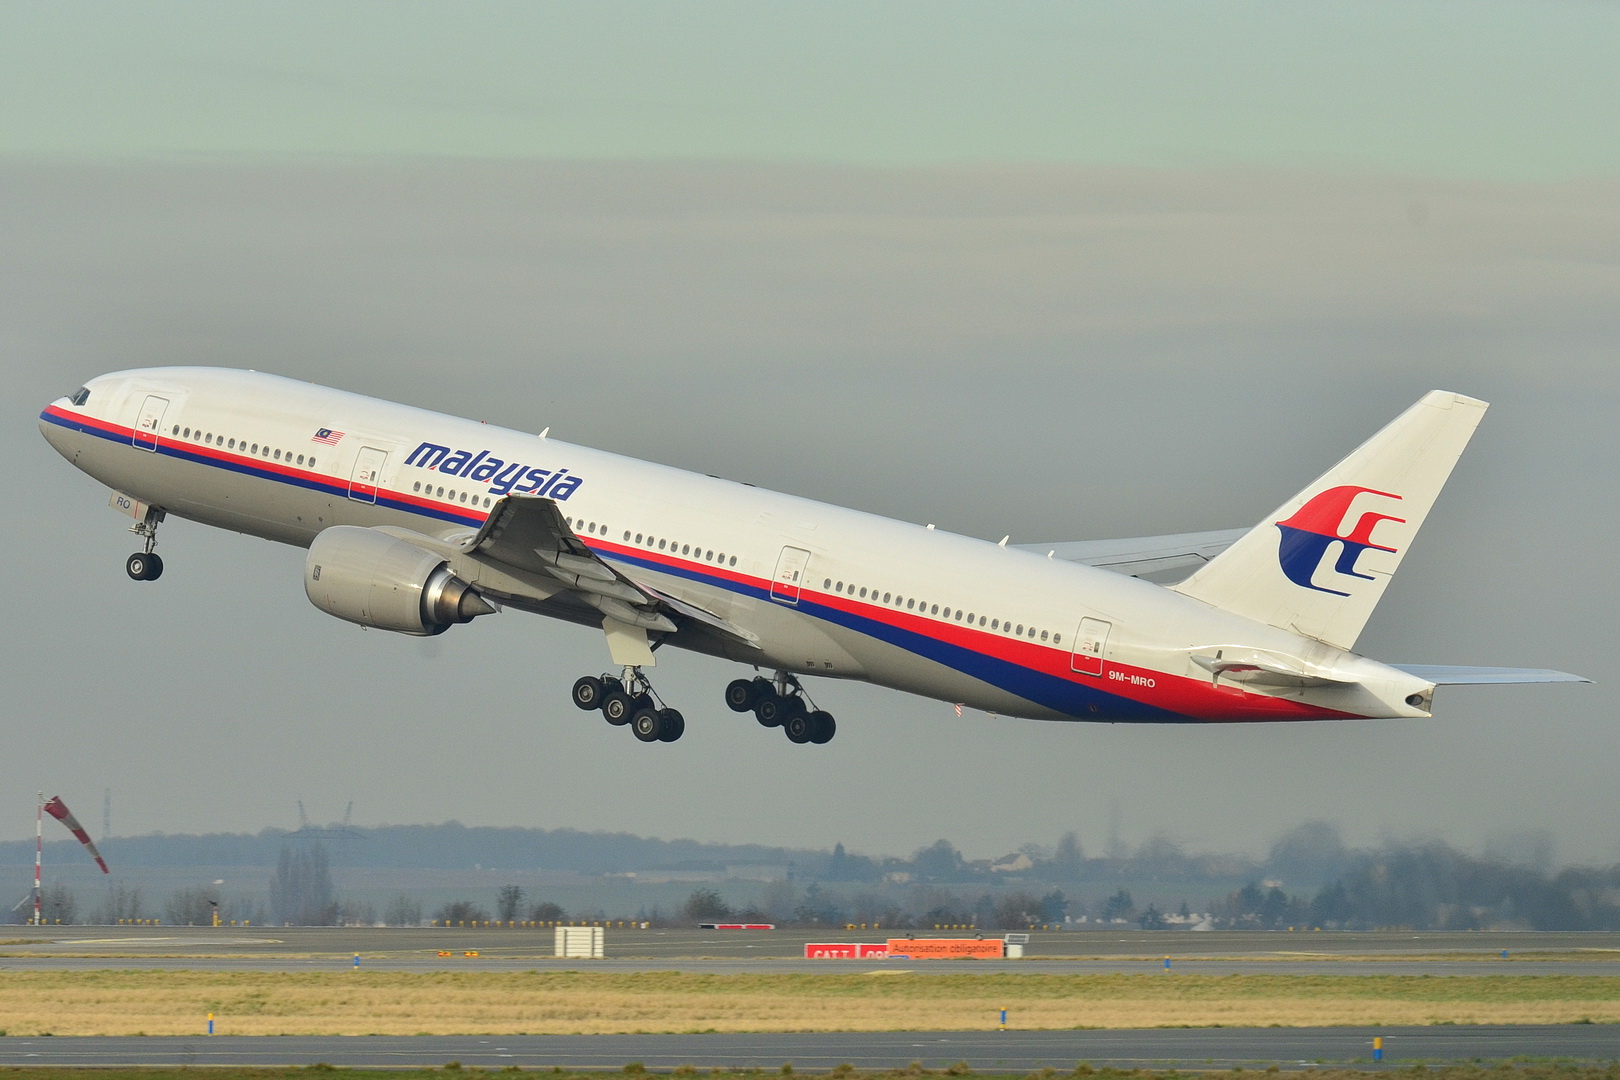 The Travel Story of 2014: The Disappearance of Malaysia Airlines MH370